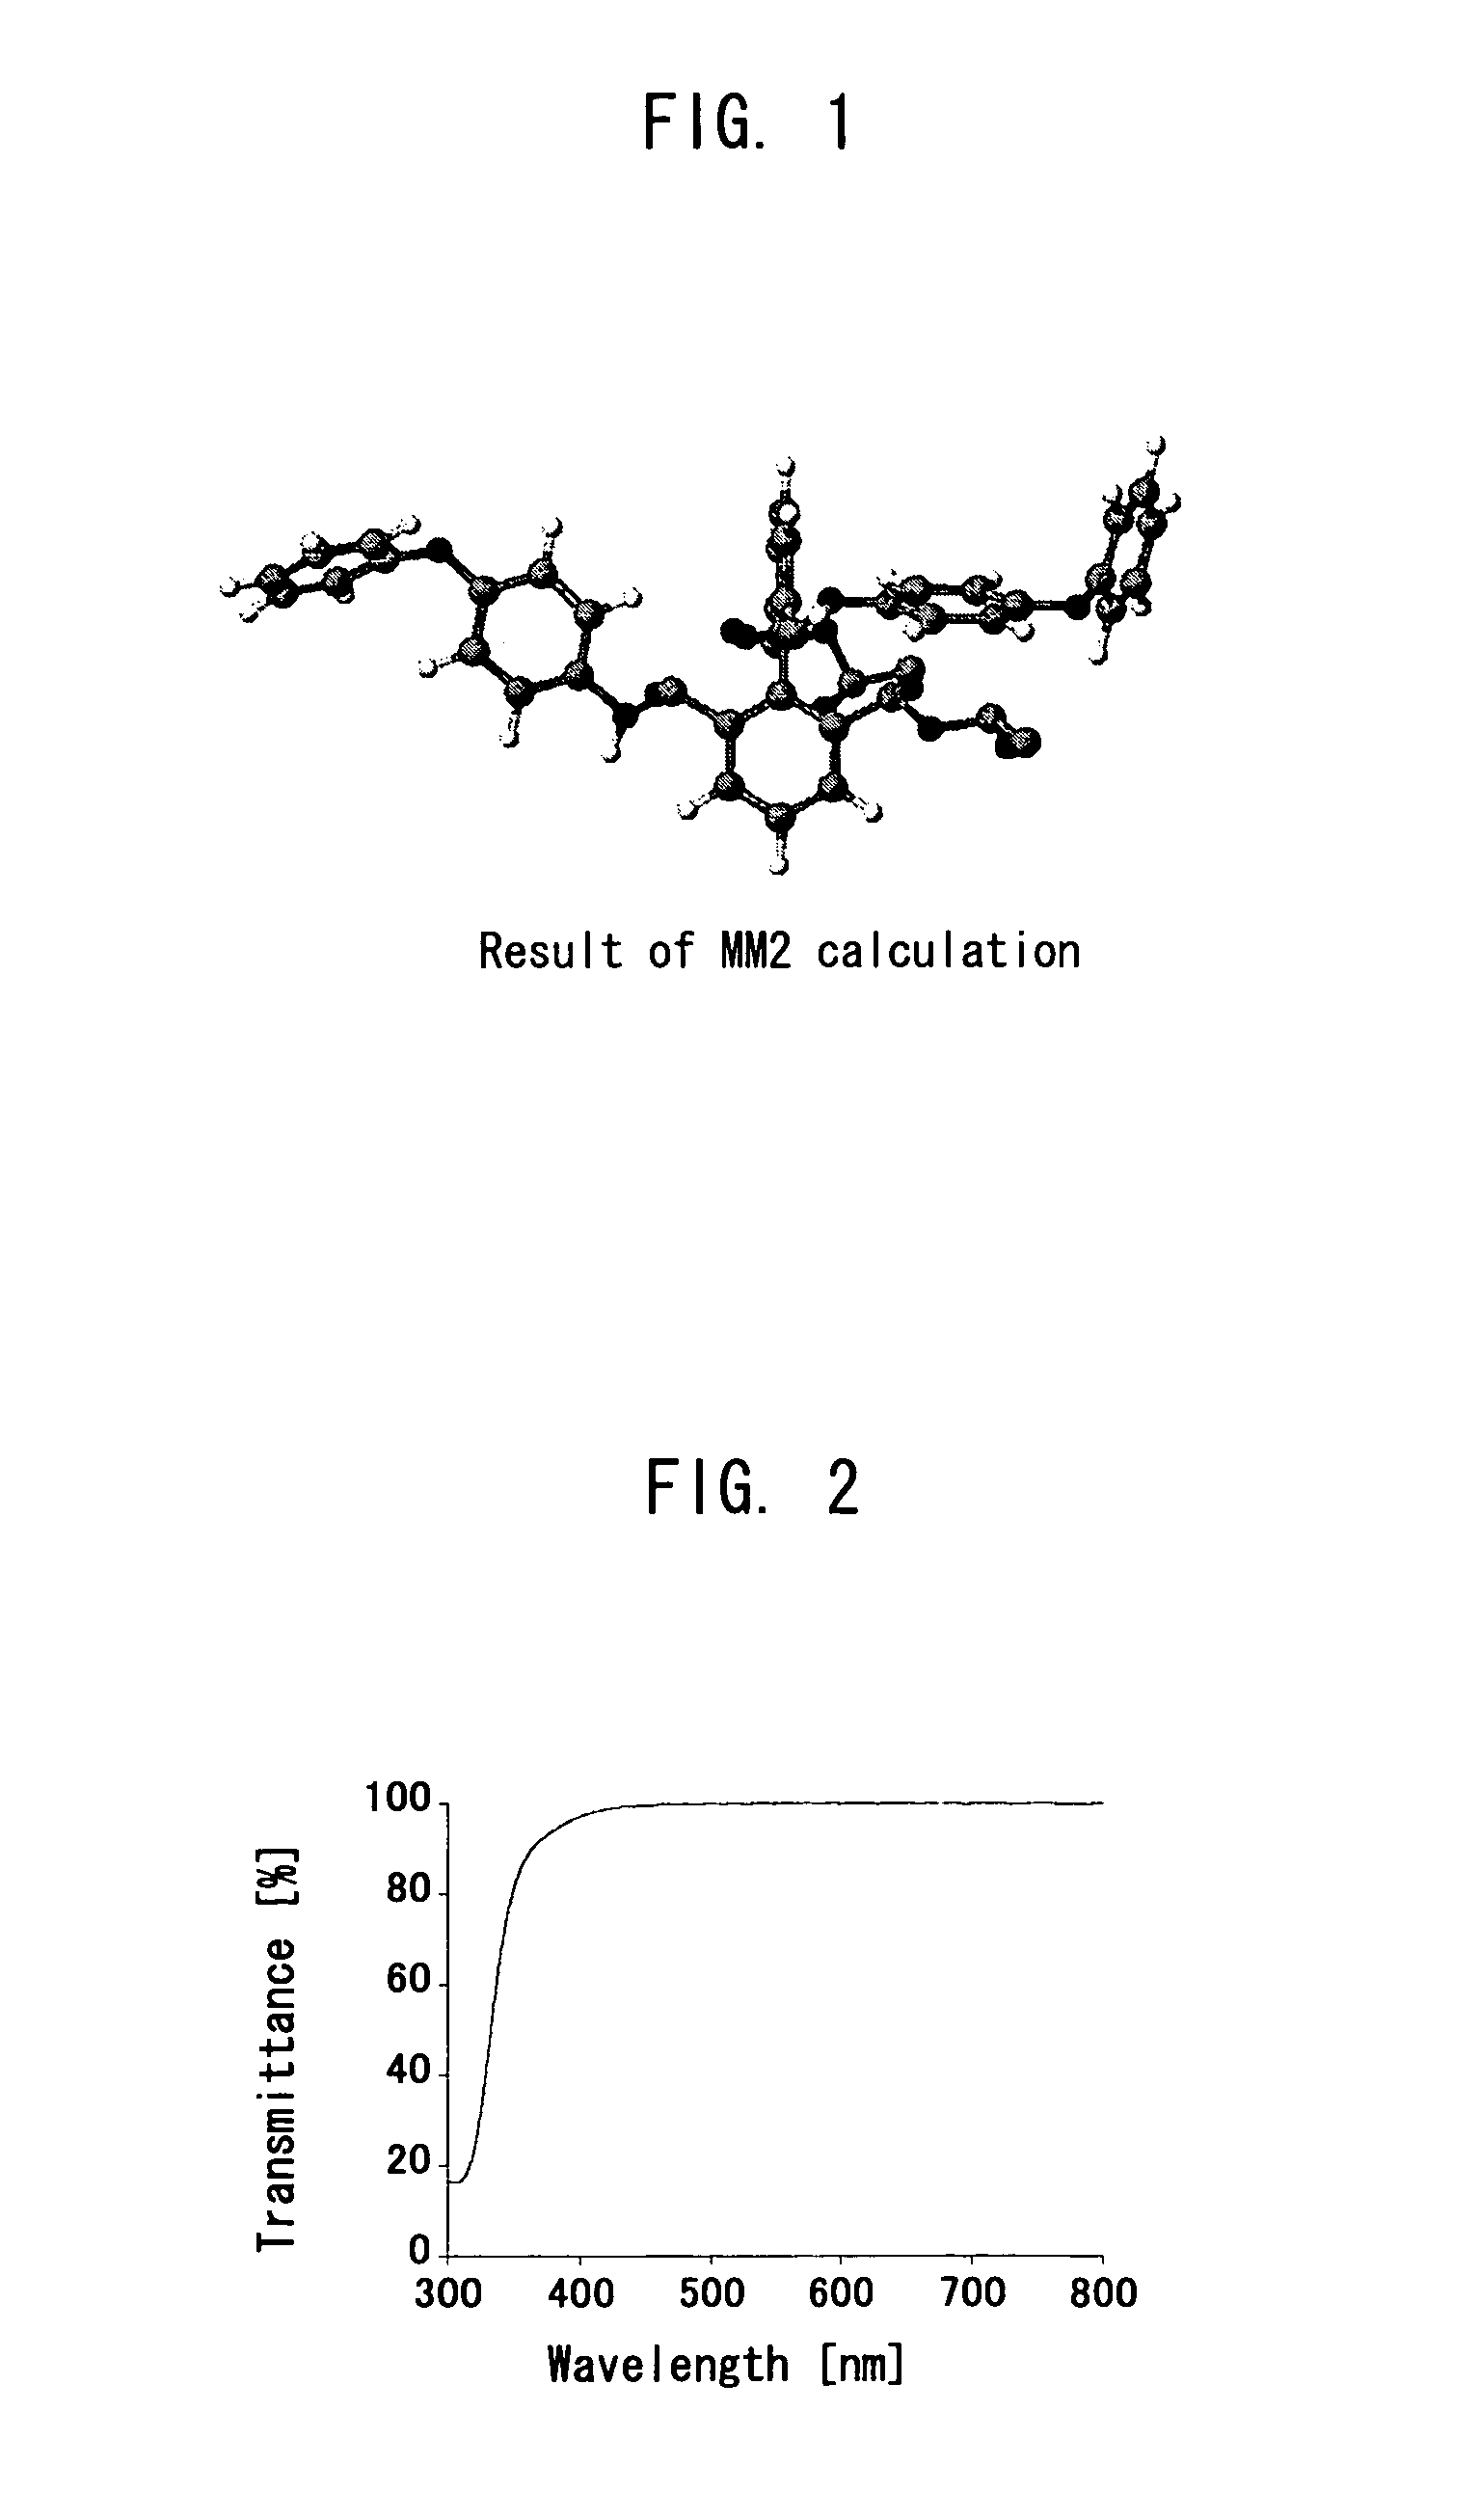 Polymer precursor, high transparency polyimide precursor, polymer compound, resin composition and article using thereof